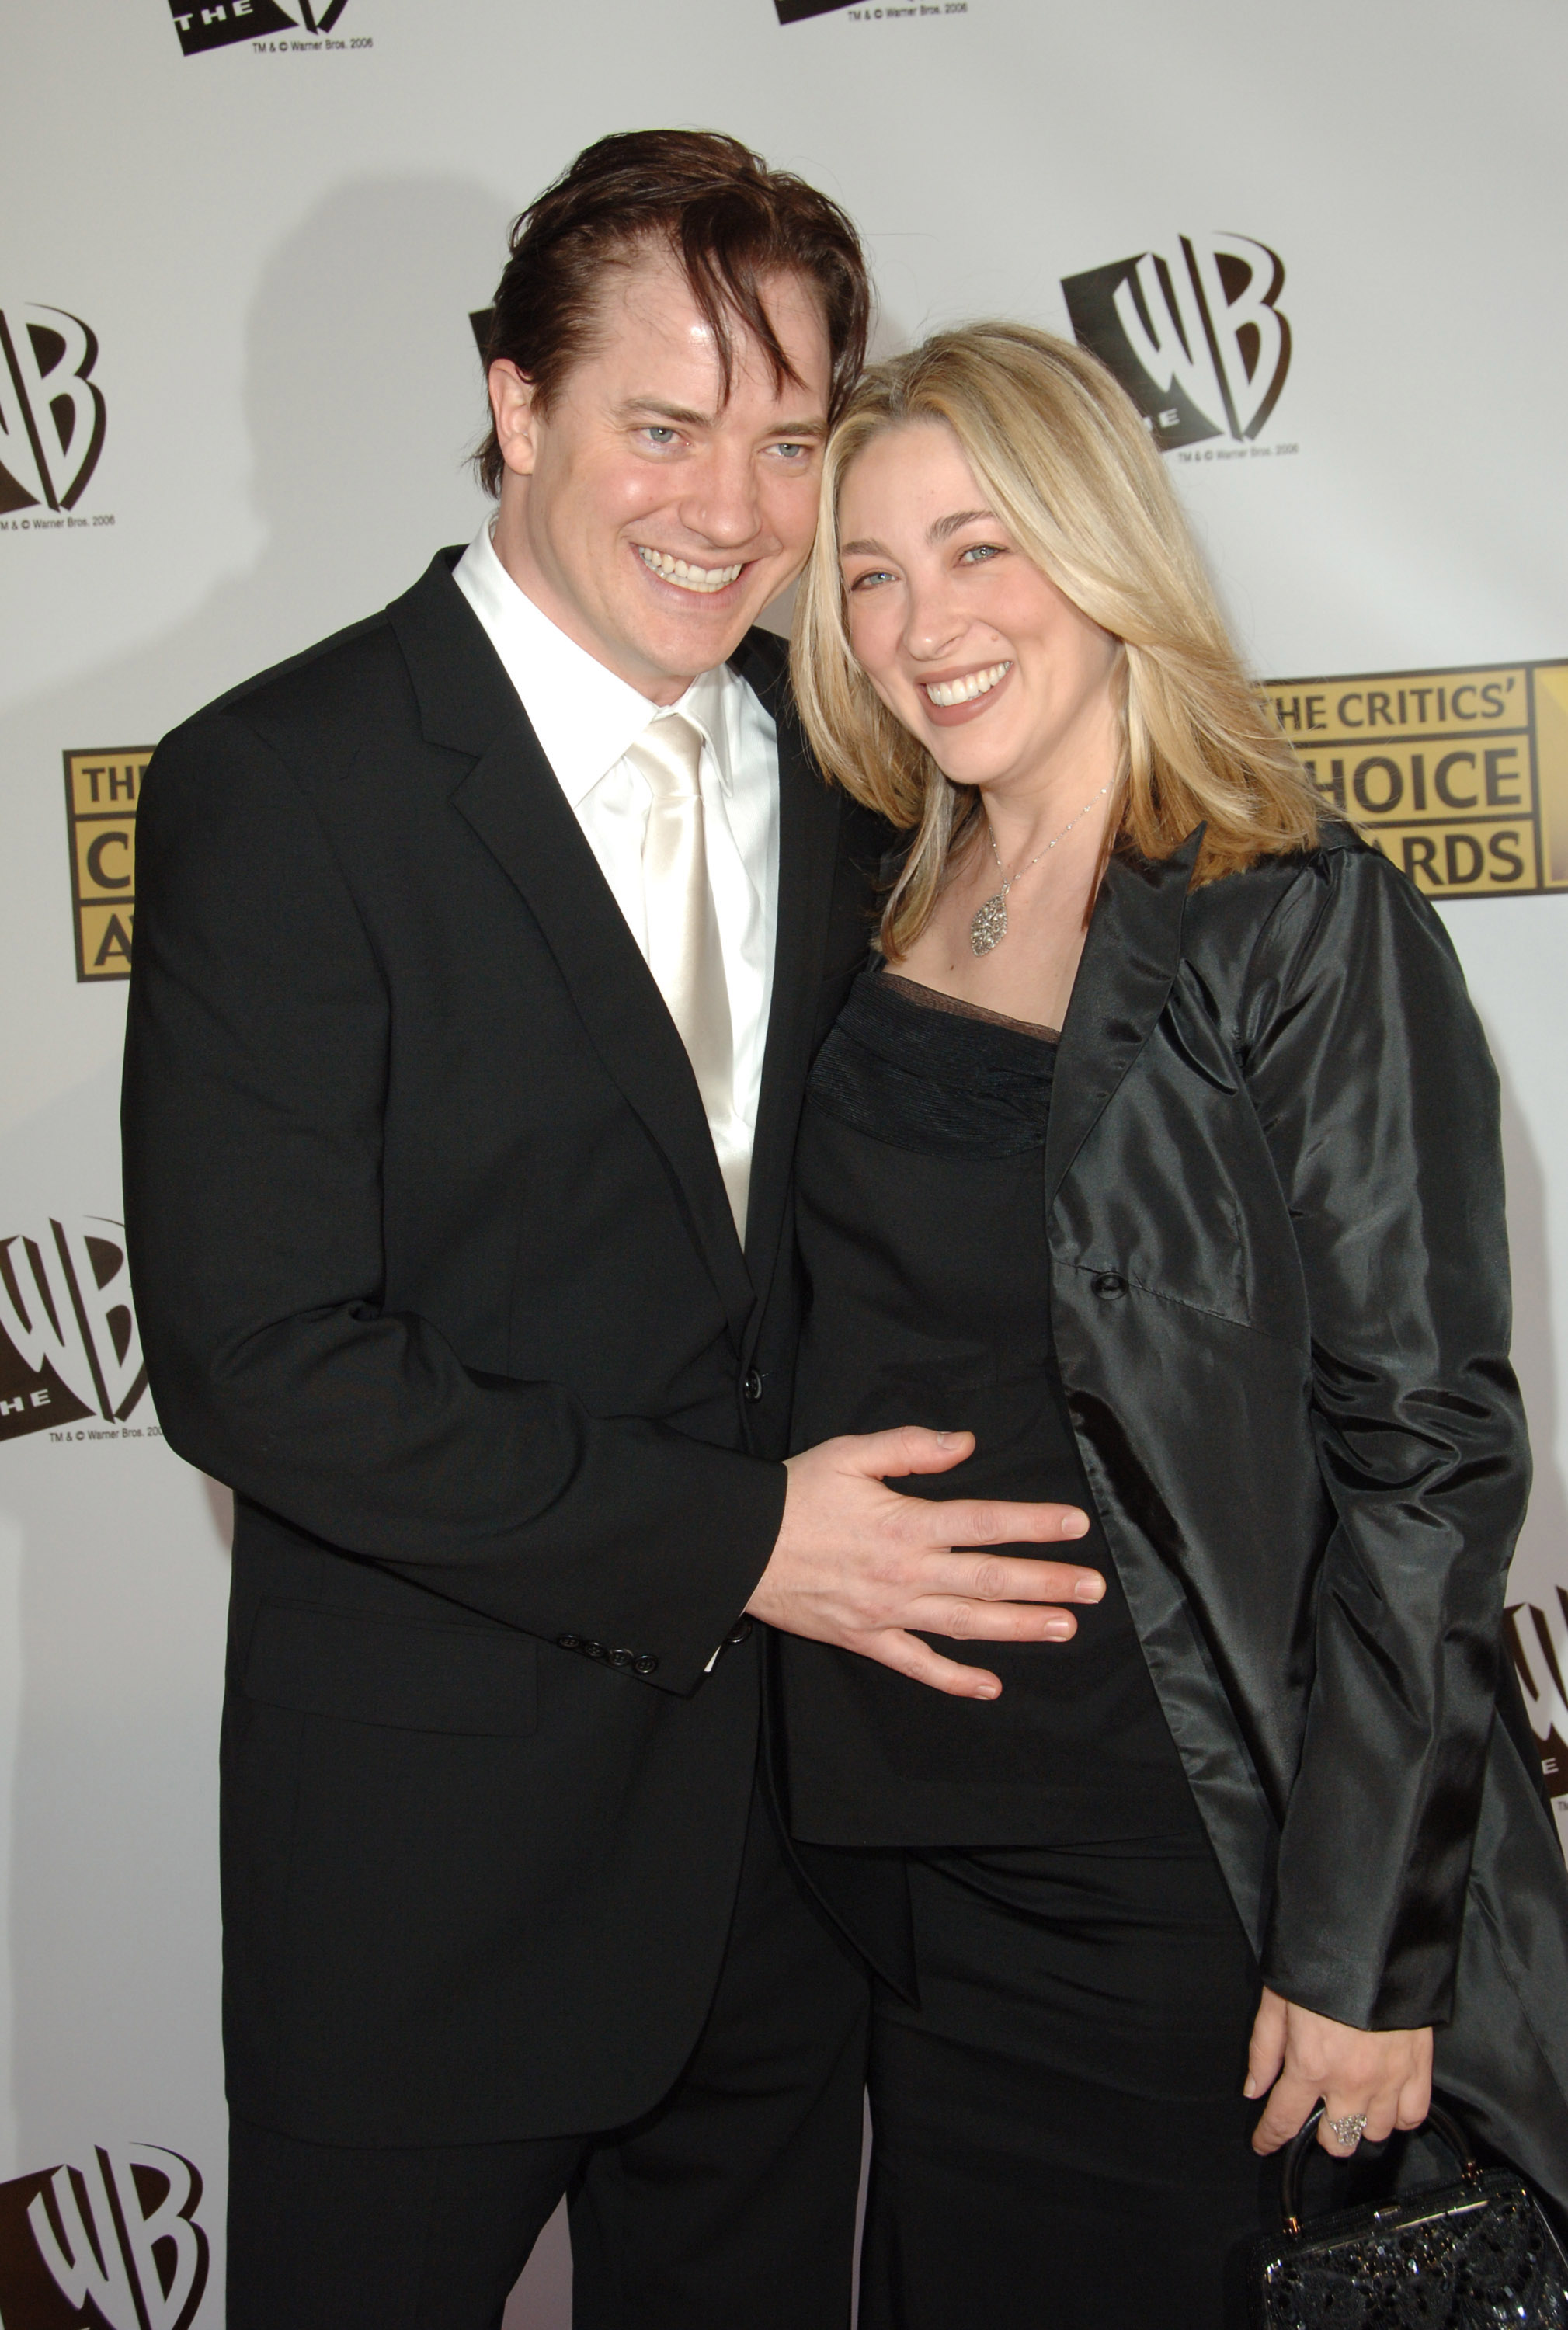 Brendan Fraser and Afton Smith at the 11th Annual Critics' Choice Awards on January 9, 2006, in Santa Monica, California. | Source: Getty Images